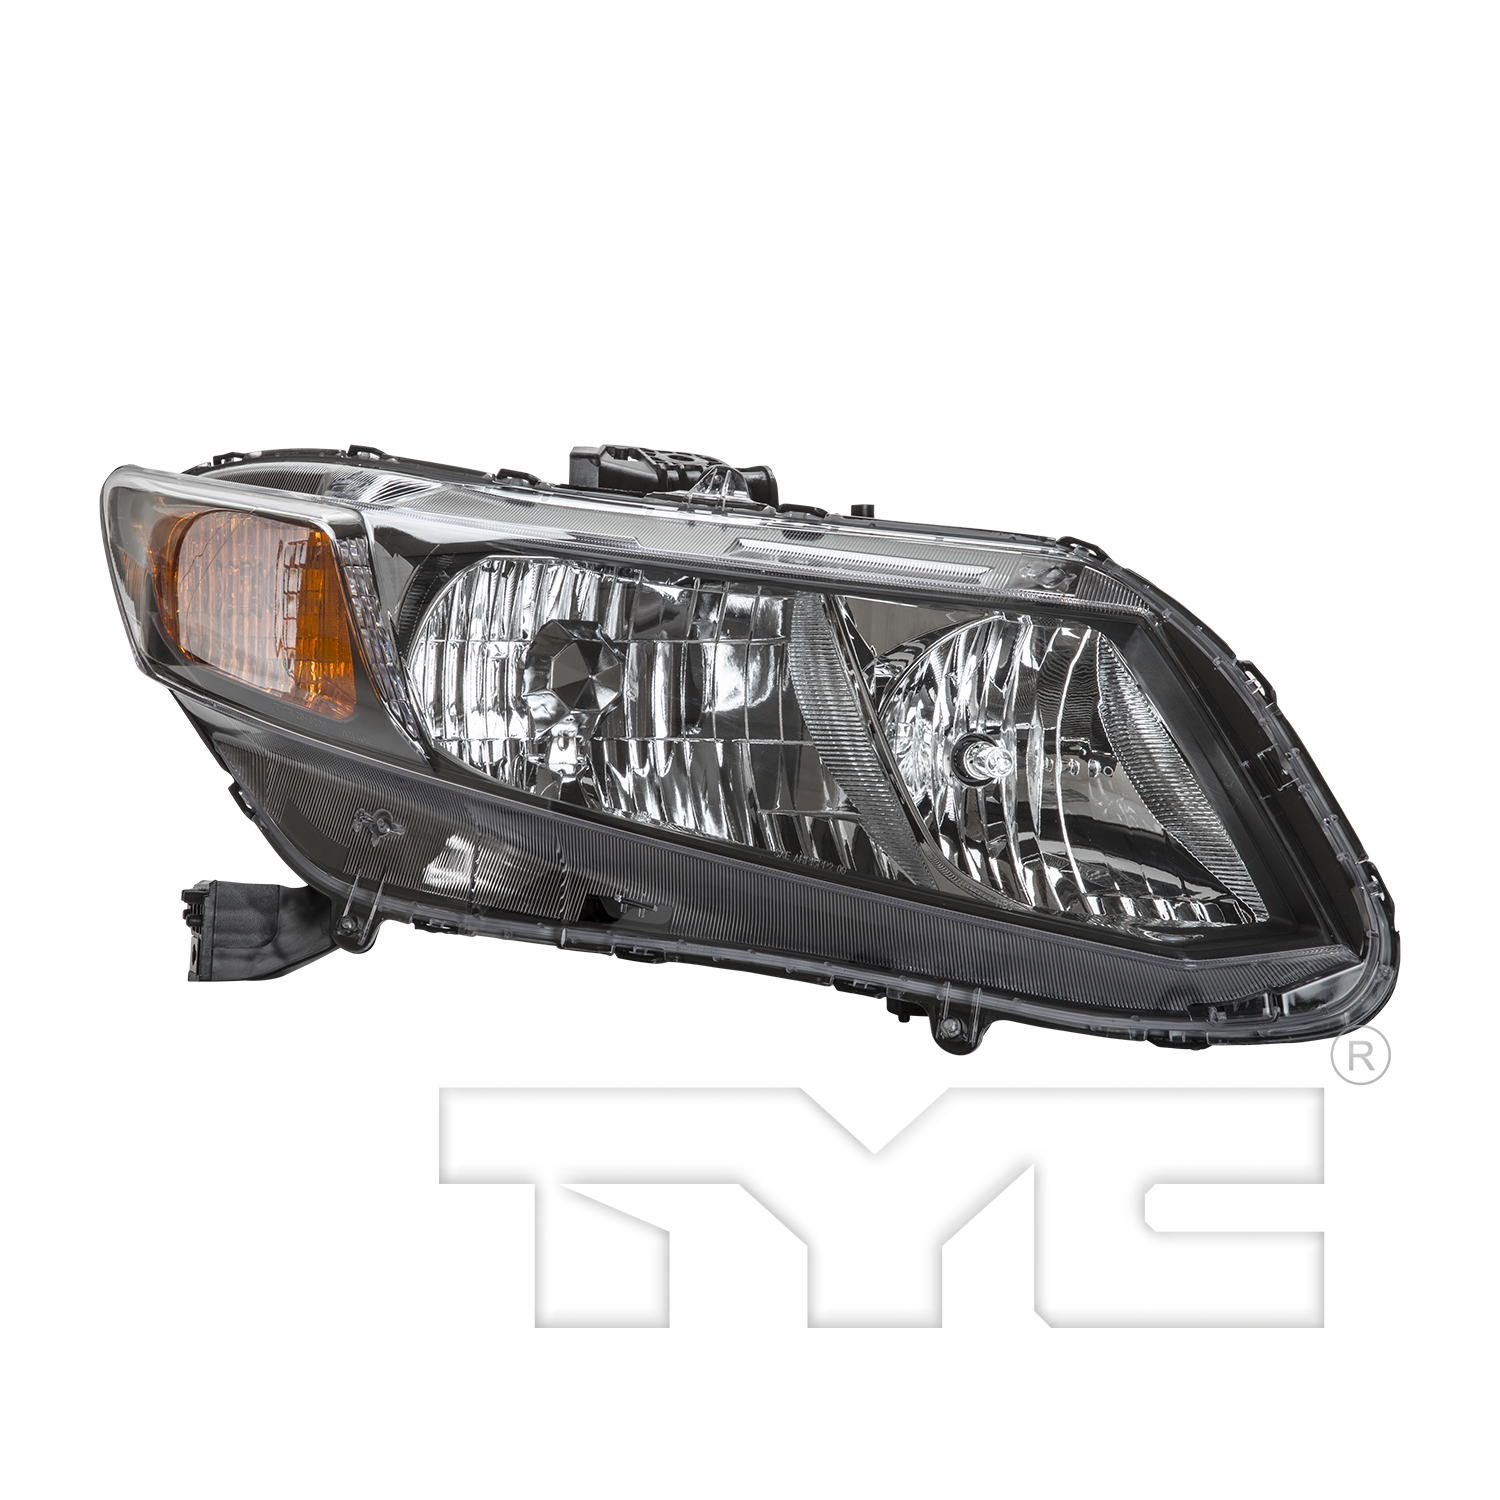 Aftermarket HEADLIGHTS for HONDA - CIVIC, CIVIC,12-12,RT Headlamp assy composite